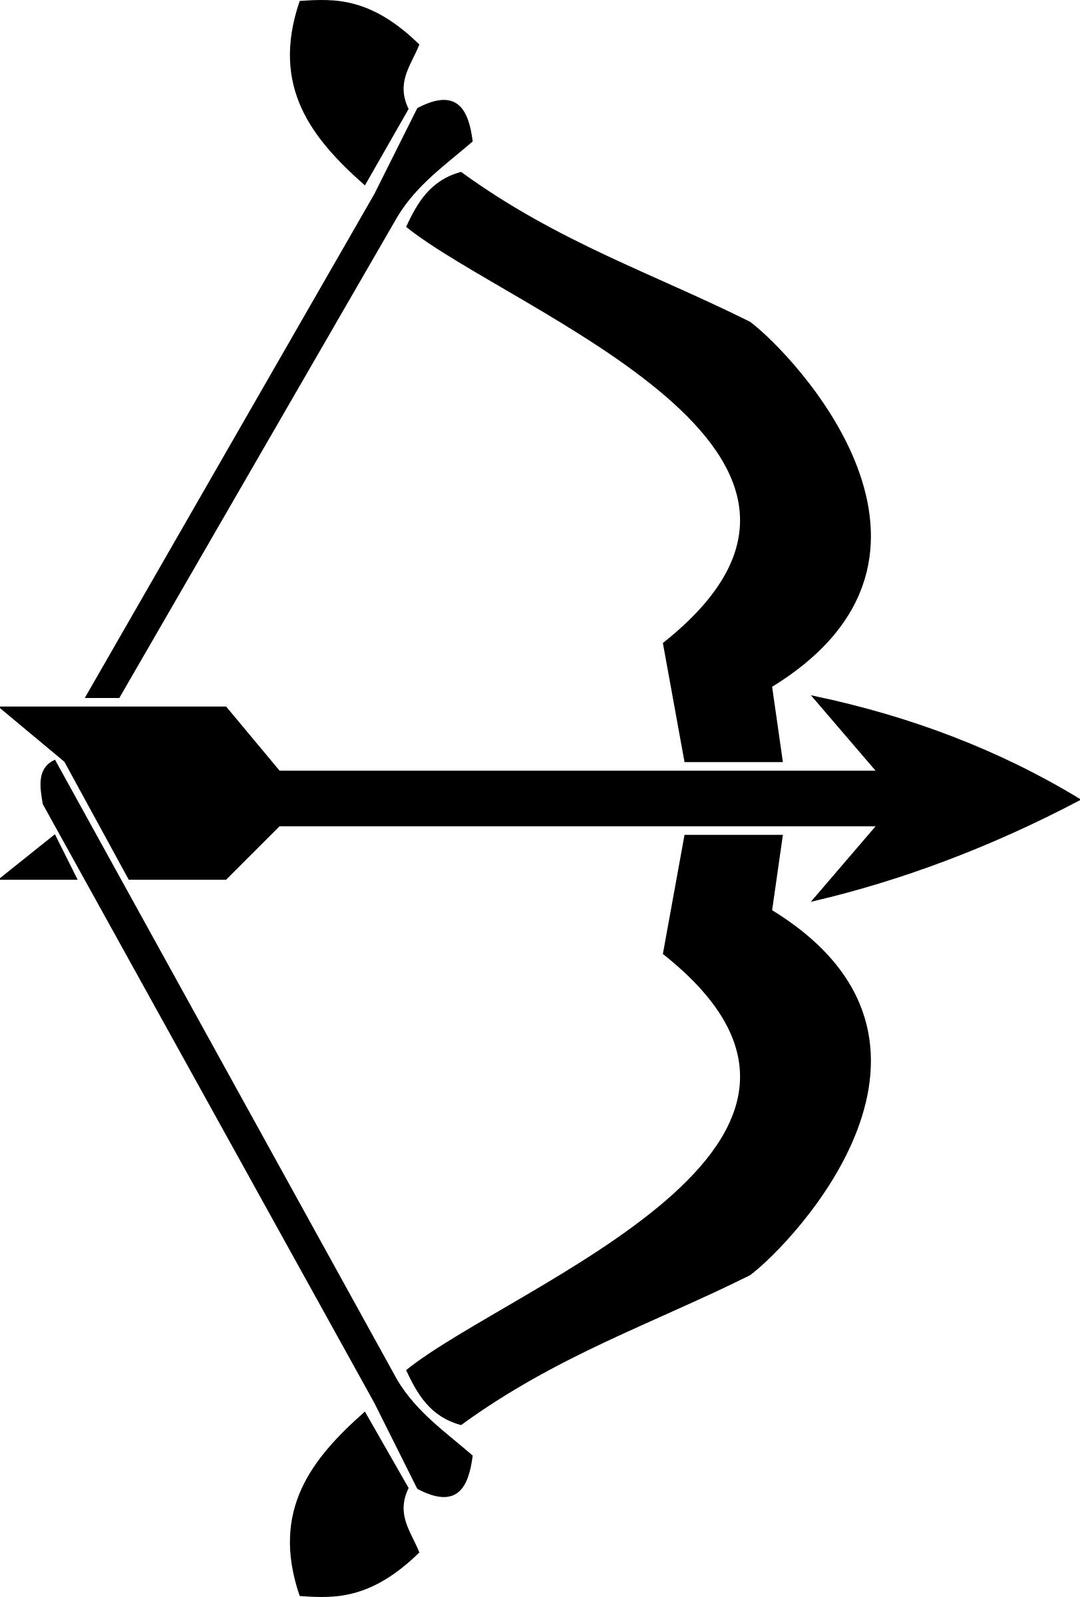 Bow and arrow png transparent